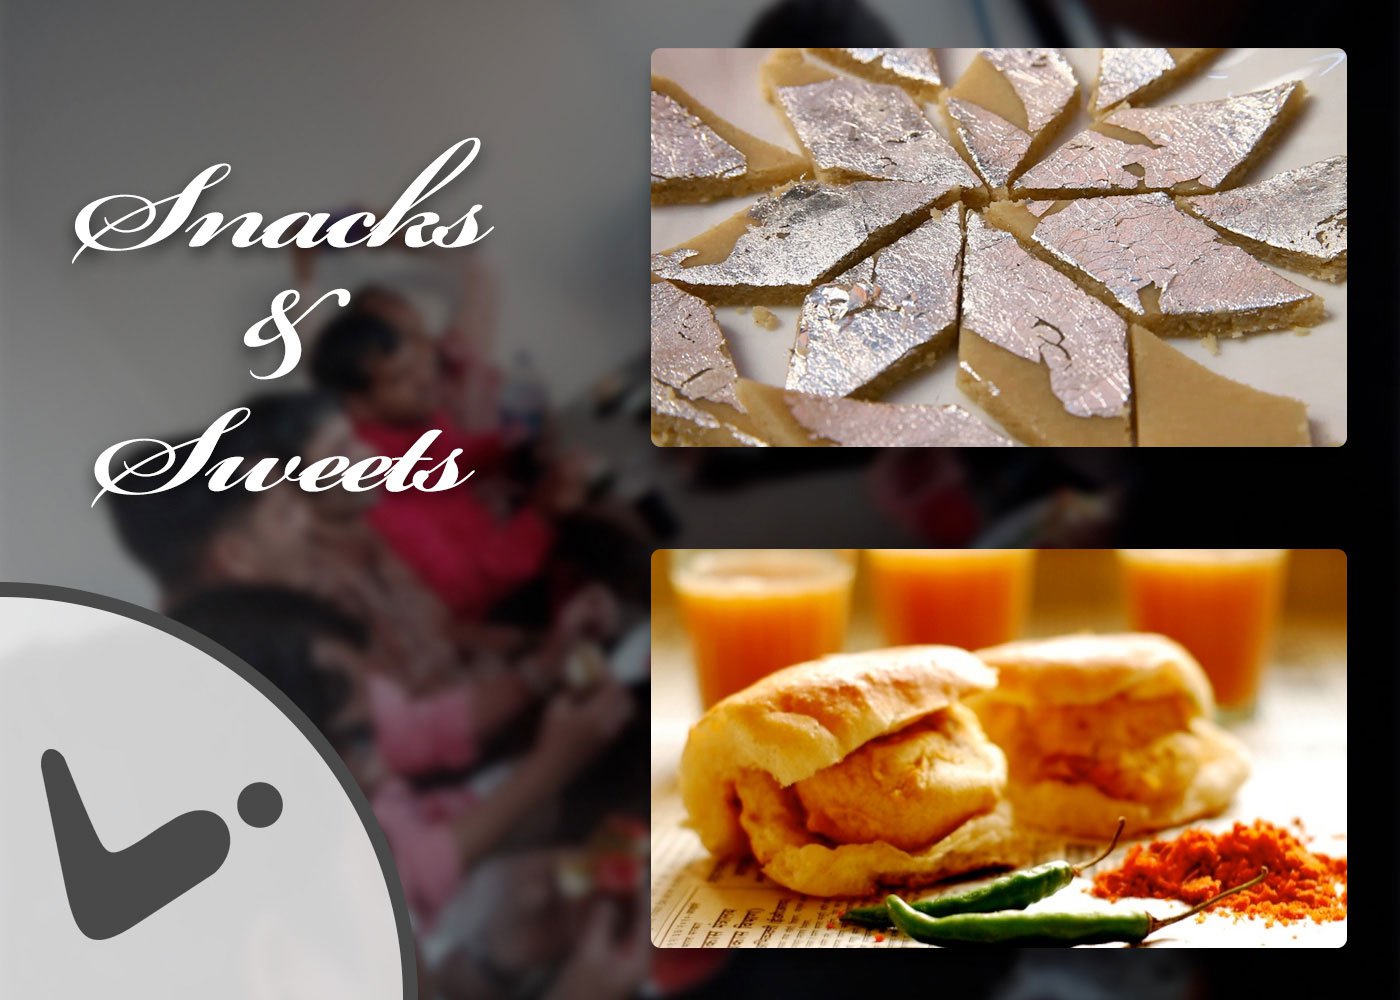 Snacks and Sweets for Diwali Celebration Event at Logistic Infotech